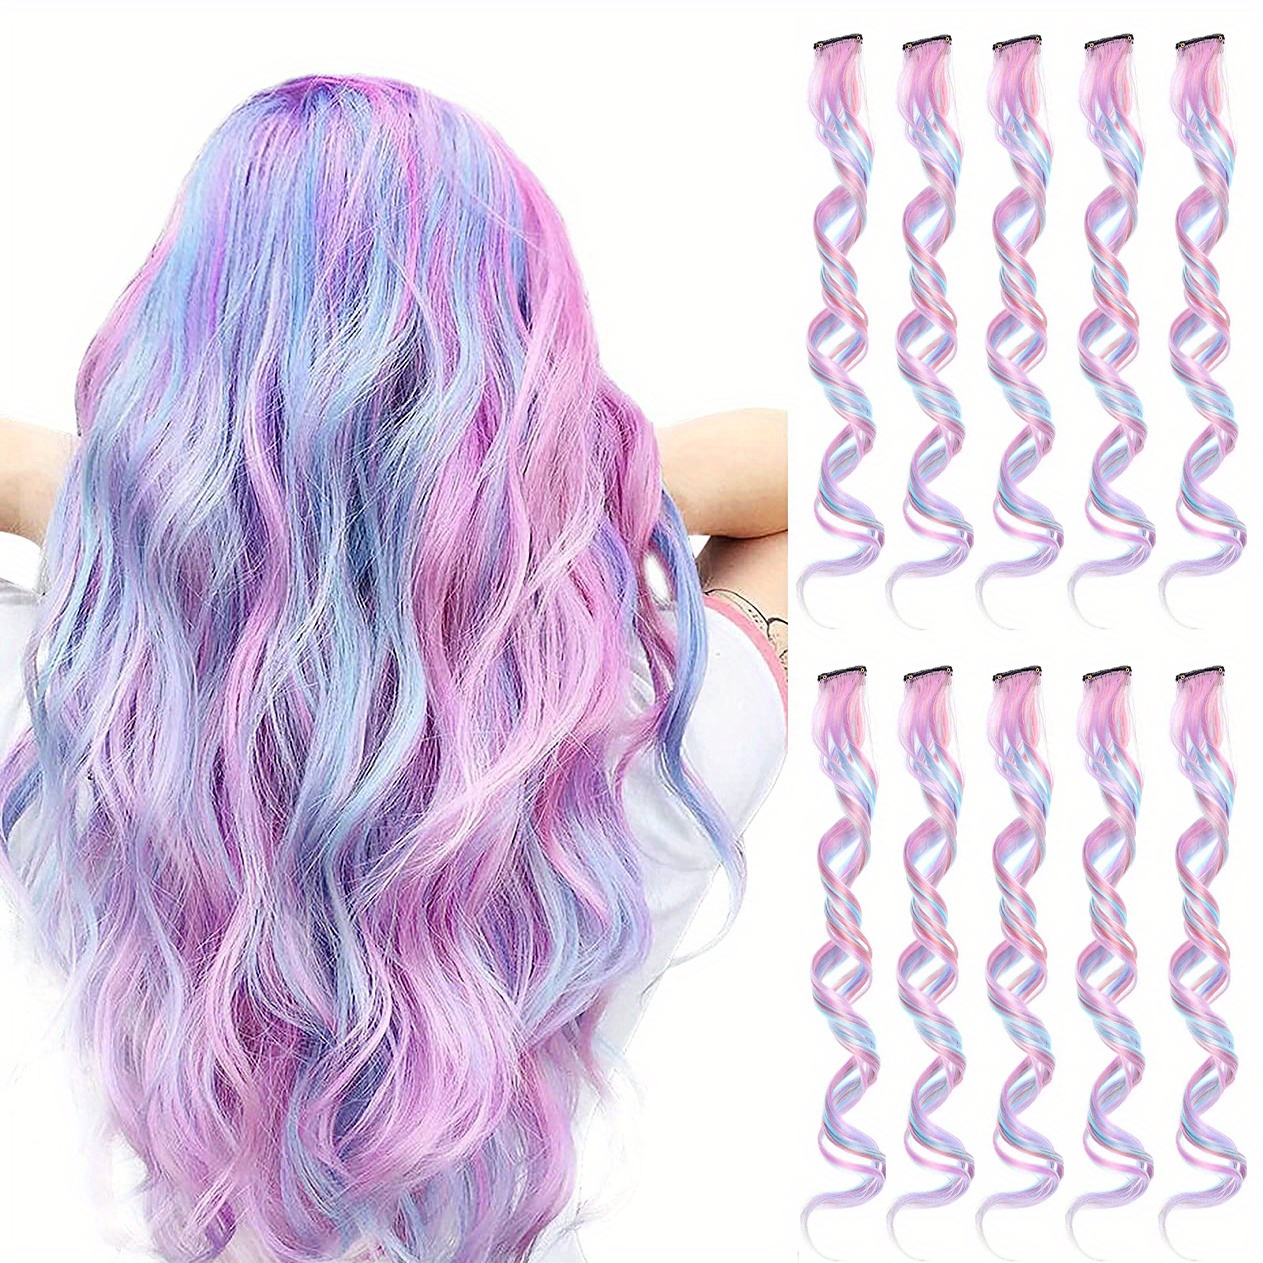 

10 Pcs Unicorn Color Clip-in Hair Extensions For Women - Heat-resistant Curly Hairpieces For Cosplay And Party Highlights - 26 Inches Hair Accessories